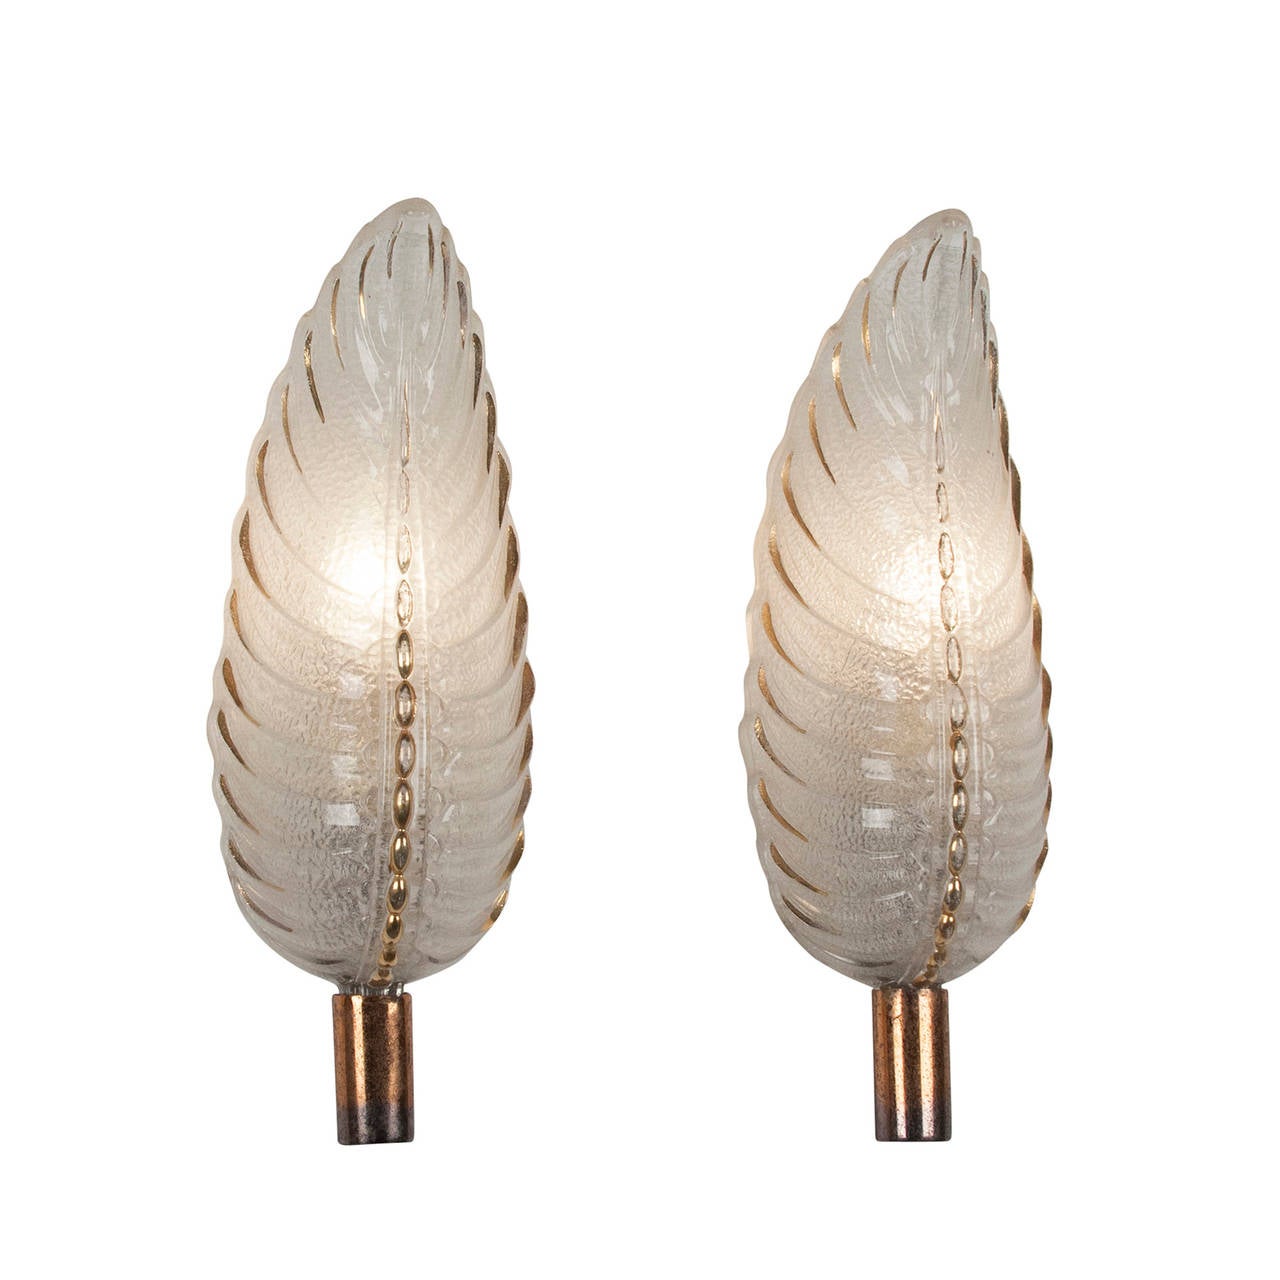 Pair of frosted leaf form glass sconces, the glass having gold accents, on bronze mounts by Ezan, French 1940s. Signed. Height 11 1/2 in, width 3 in. (Item #2092)
Price for pair.